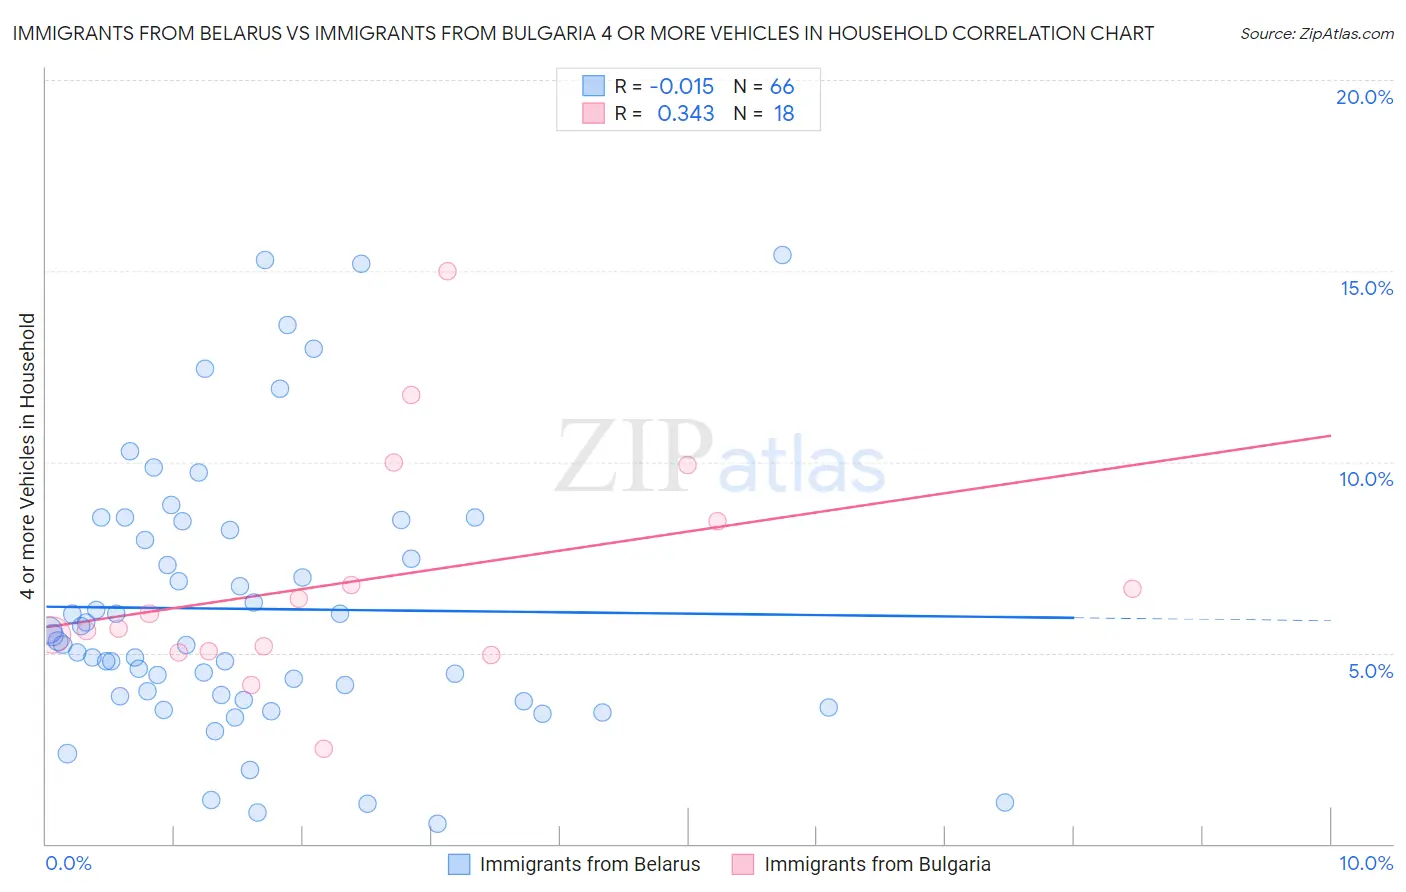 Immigrants from Belarus vs Immigrants from Bulgaria 4 or more Vehicles in Household